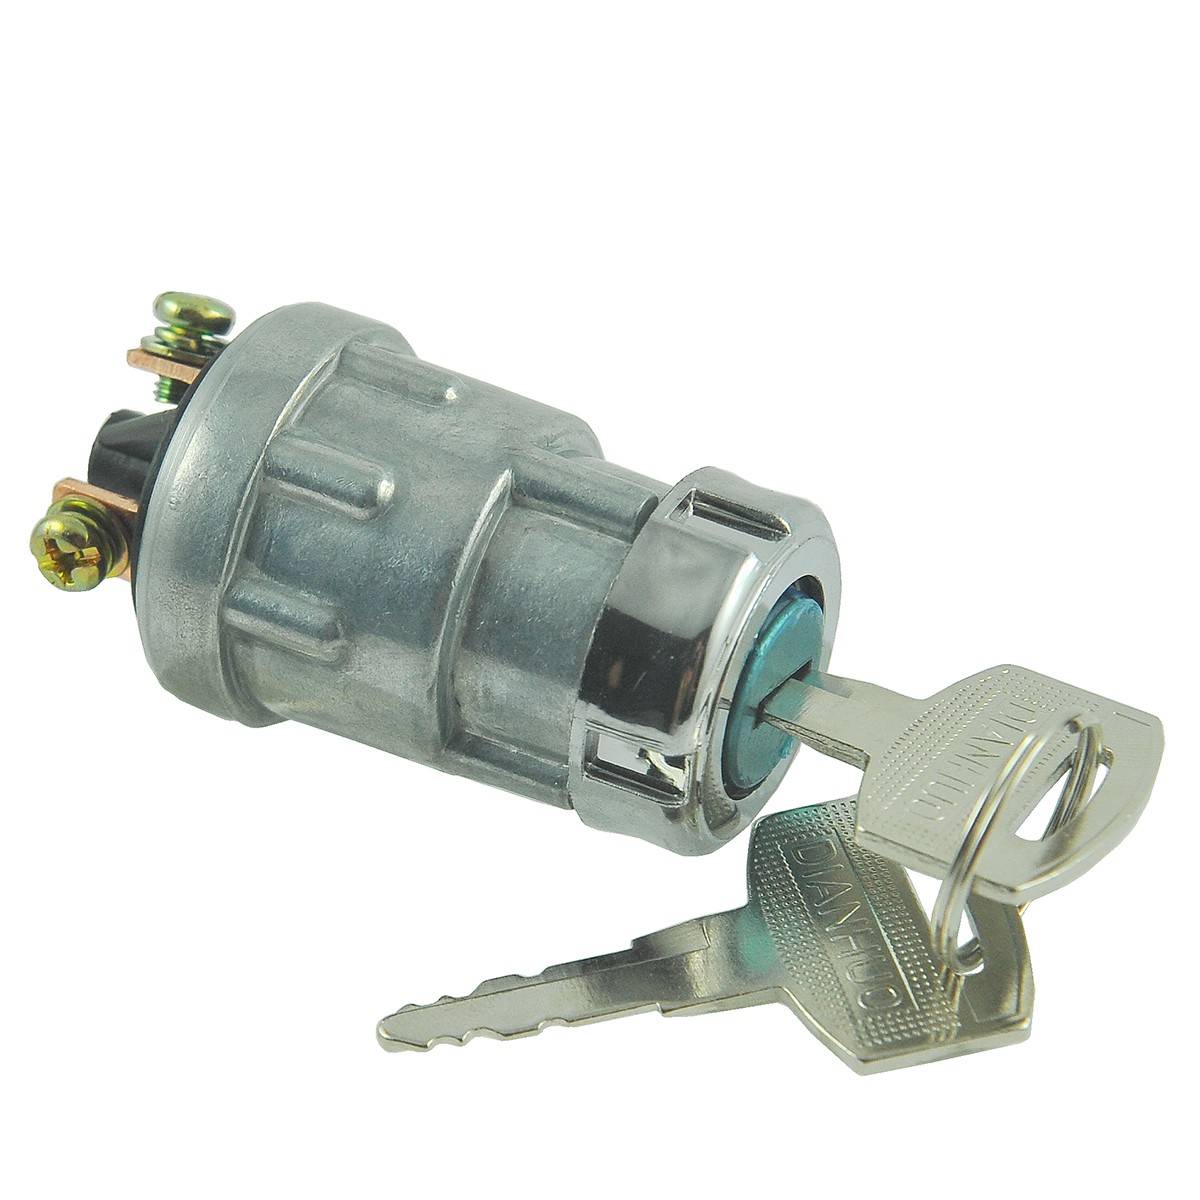 Ignition switch for DWC-22 / TSX-IK105 chipper